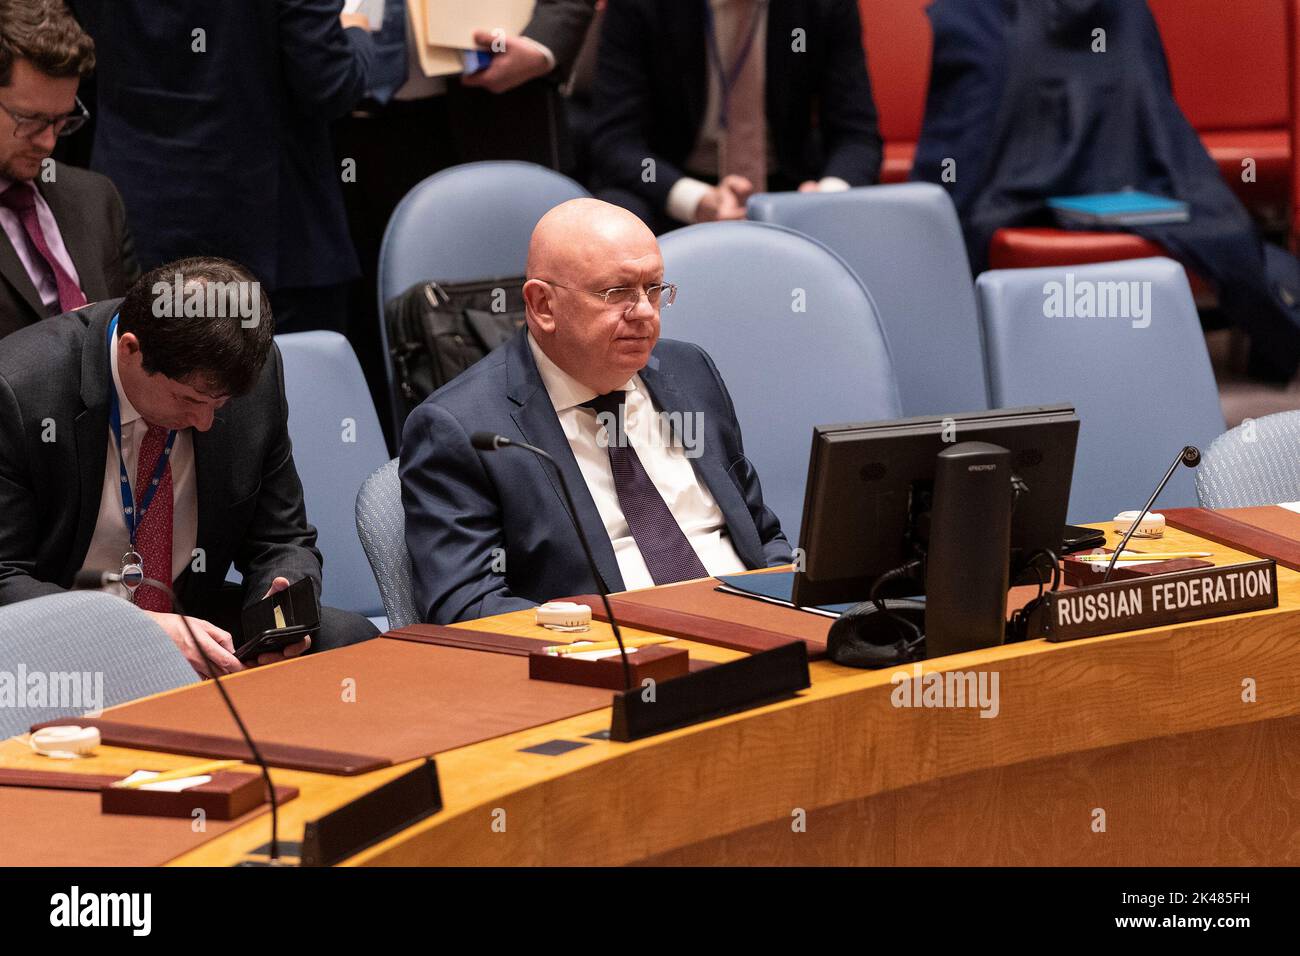 New York, United States. 01st Oct, 2022. Ambassador of Russian Federation Vassily Nebenzia attends Security Council meeting to vote on joint resolution to condemn Russian on annexation in UN Headquarters. The Security Council voted on a joint draft resolution condemning annexation by Russia of Ukrainian territory sized in the past 7 months of the war. 4 countries (China, Gabon, Brazil, India) abstained, Russia vetoed the resolution and the rest of SC members voted for. (Photo by Lev Radin/Pacific Press) Credit: Pacific Press Media Production Corp./Alamy Live News Stock Photo